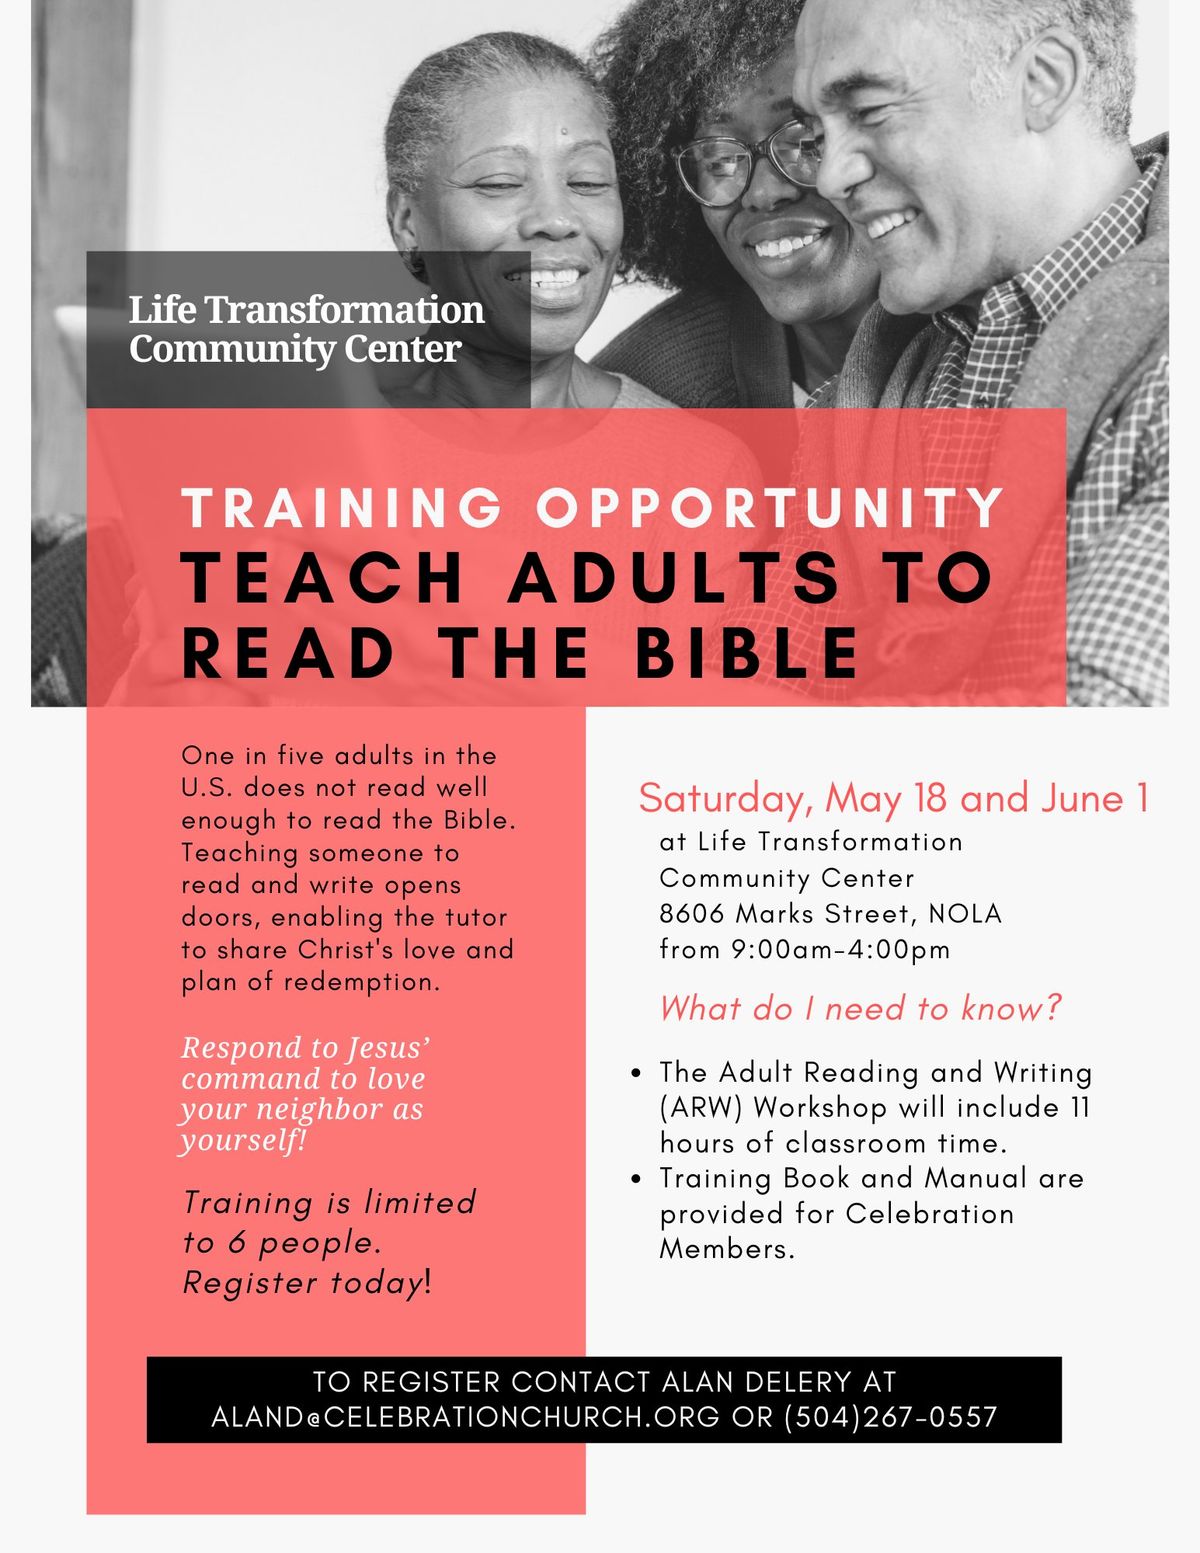 Teach Adults to Read the Bible: Training Opportunity 